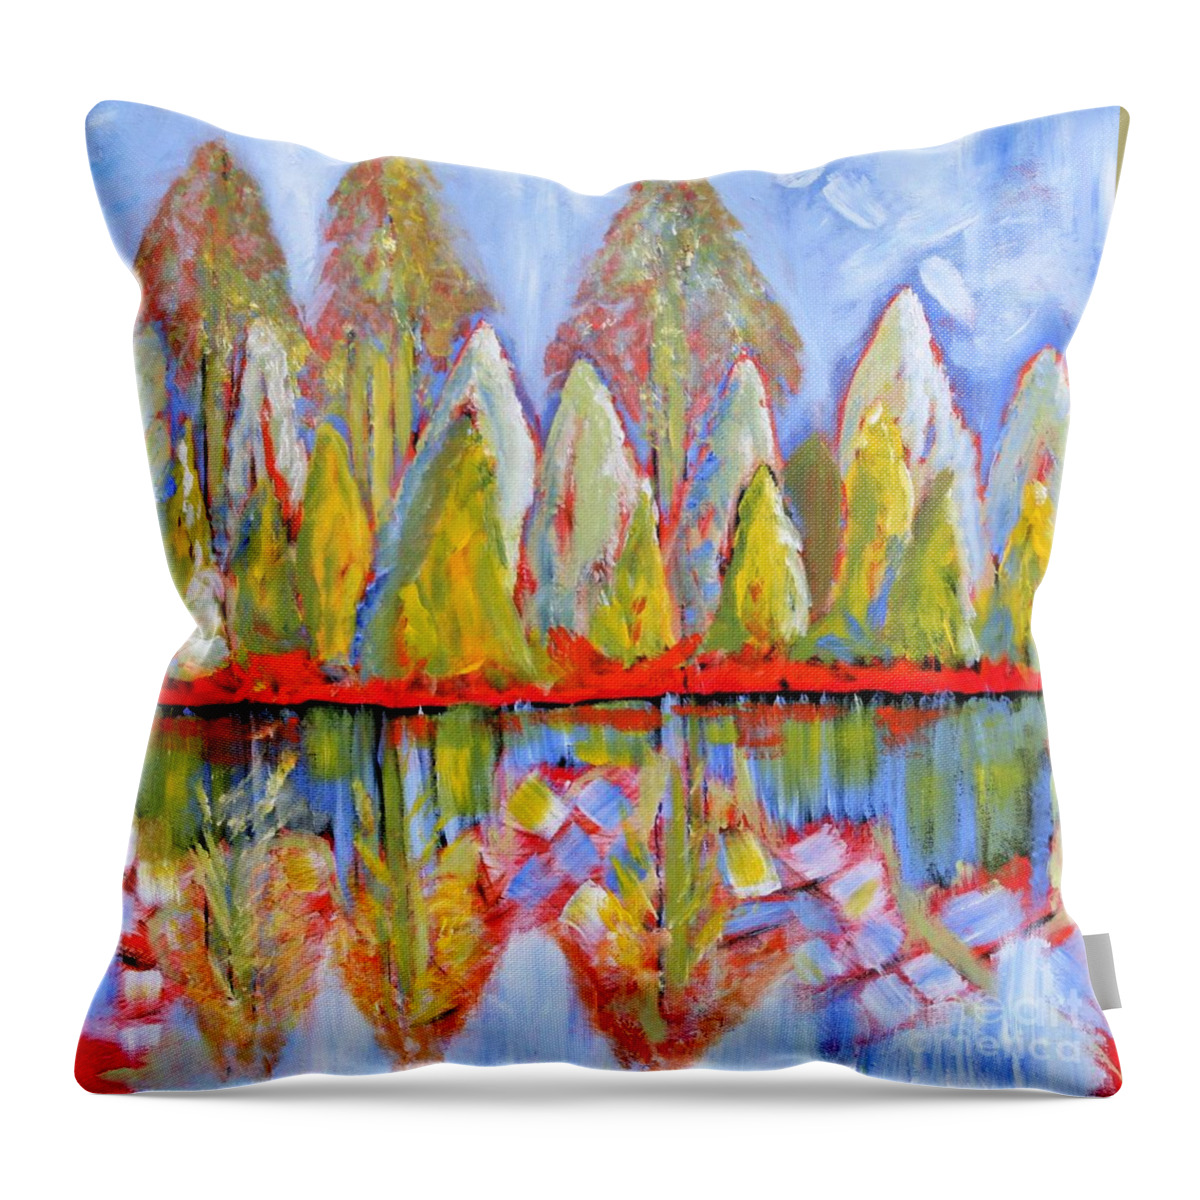 Bight Throw Pillow featuring the painting Lakeside by Tracey Lee Cassin